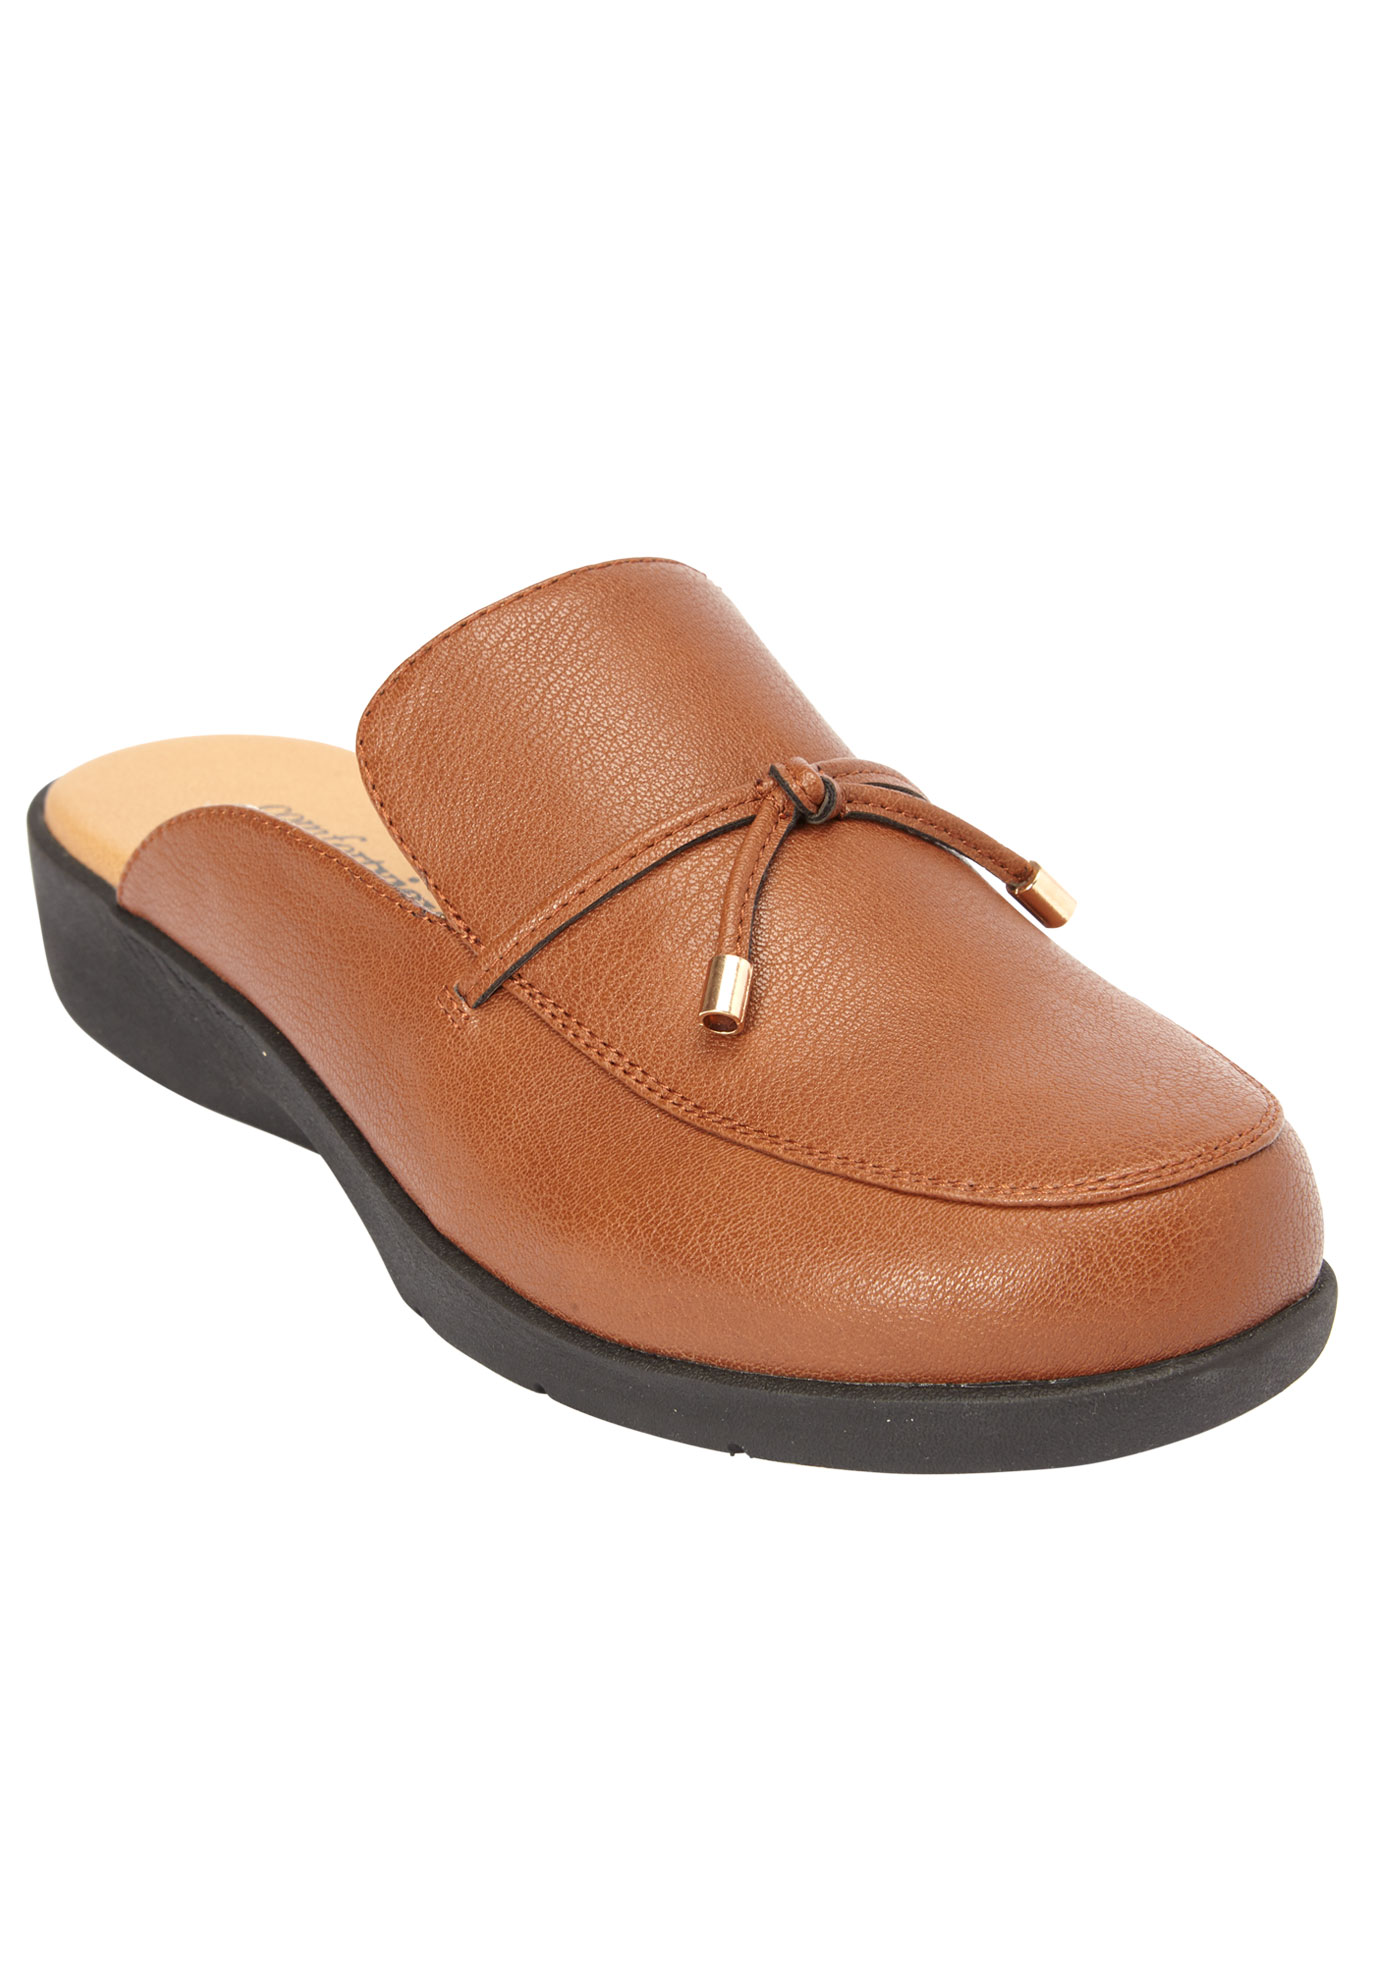 Women's The Lillie Mule by Comfortview